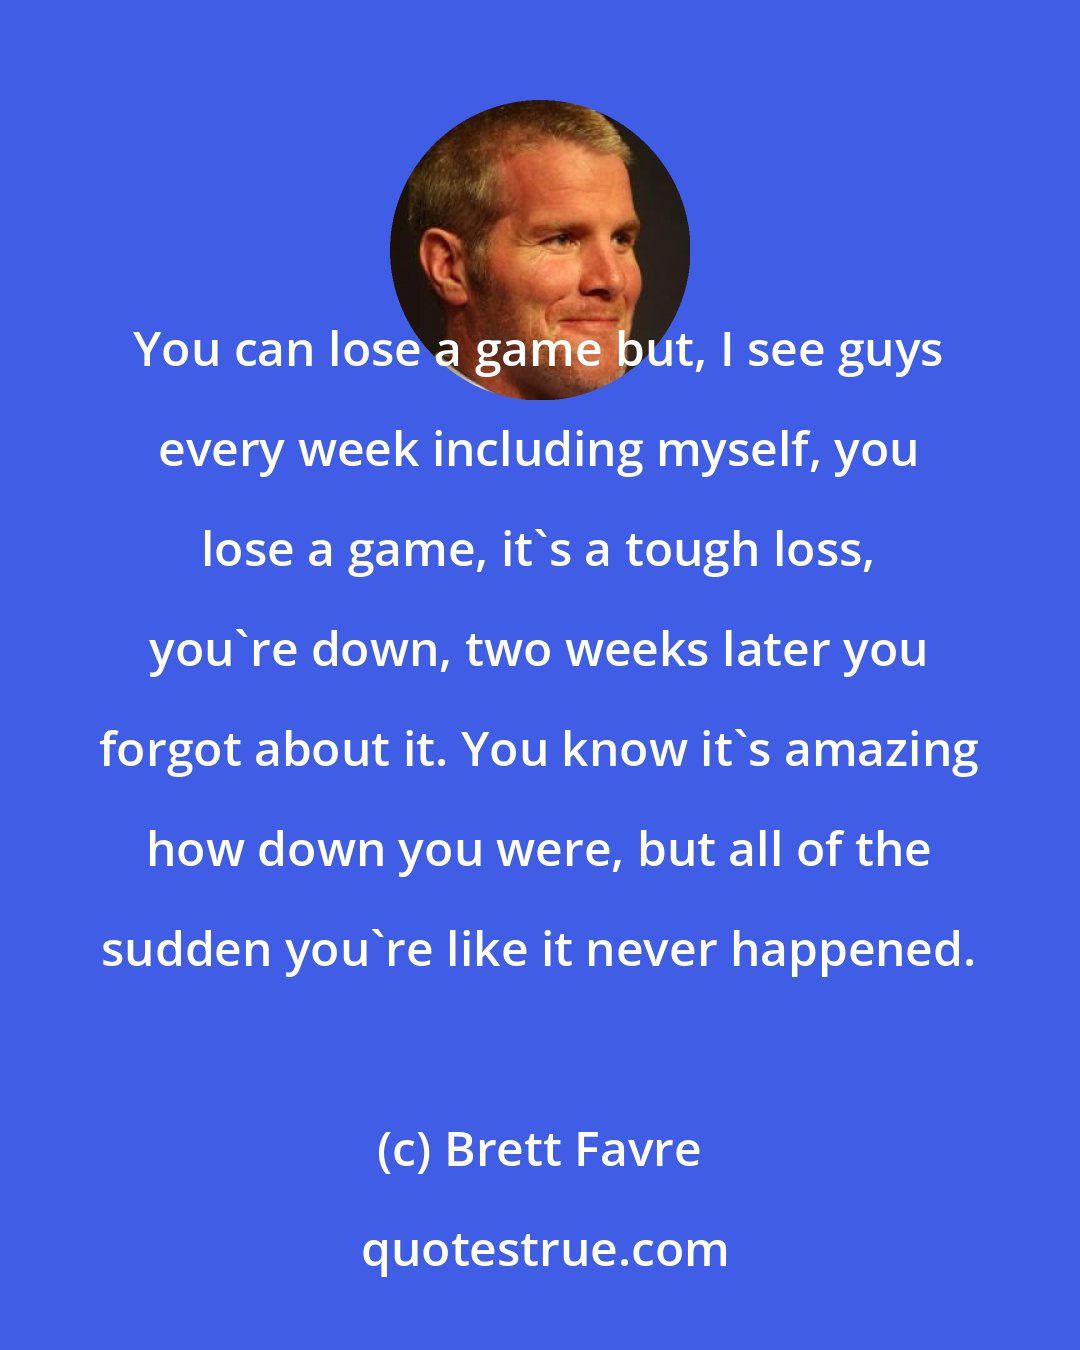 Brett Favre: You can lose a game but, I see guys every week including myself, you lose a game, it's a tough loss, you're down, two weeks later you forgot about it. You know it's amazing how down you were, but all of the sudden you're like it never happened.